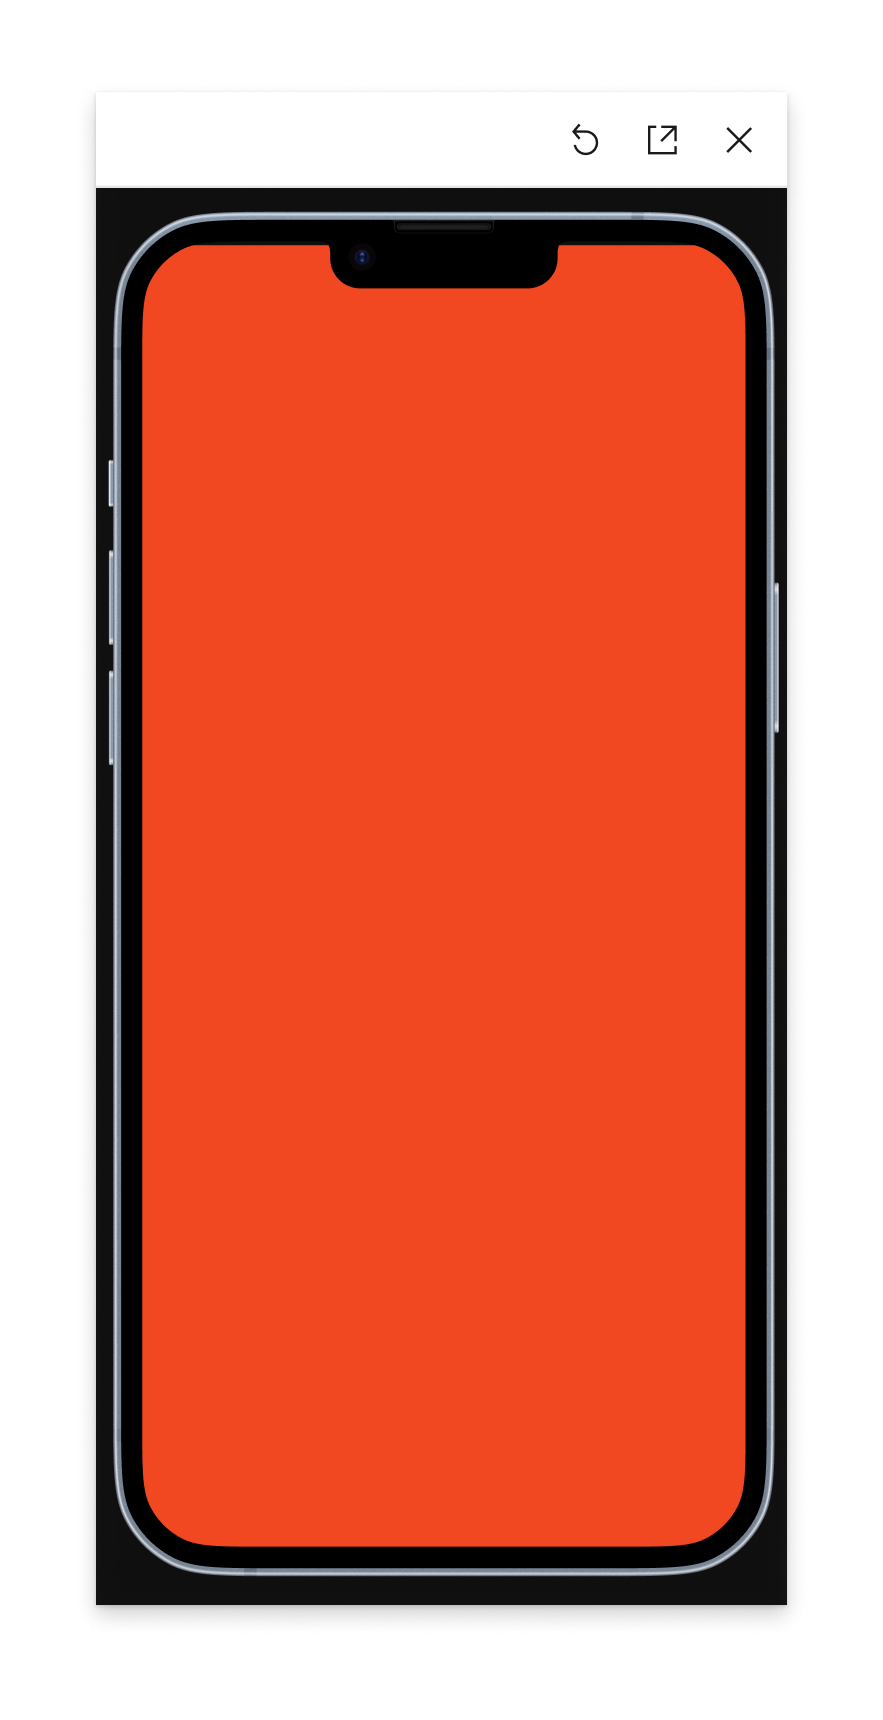 A smartphone interface with the entire screen filled in red, likely representing a placeholder or a selected area for design purposes, framed within the inline preview.